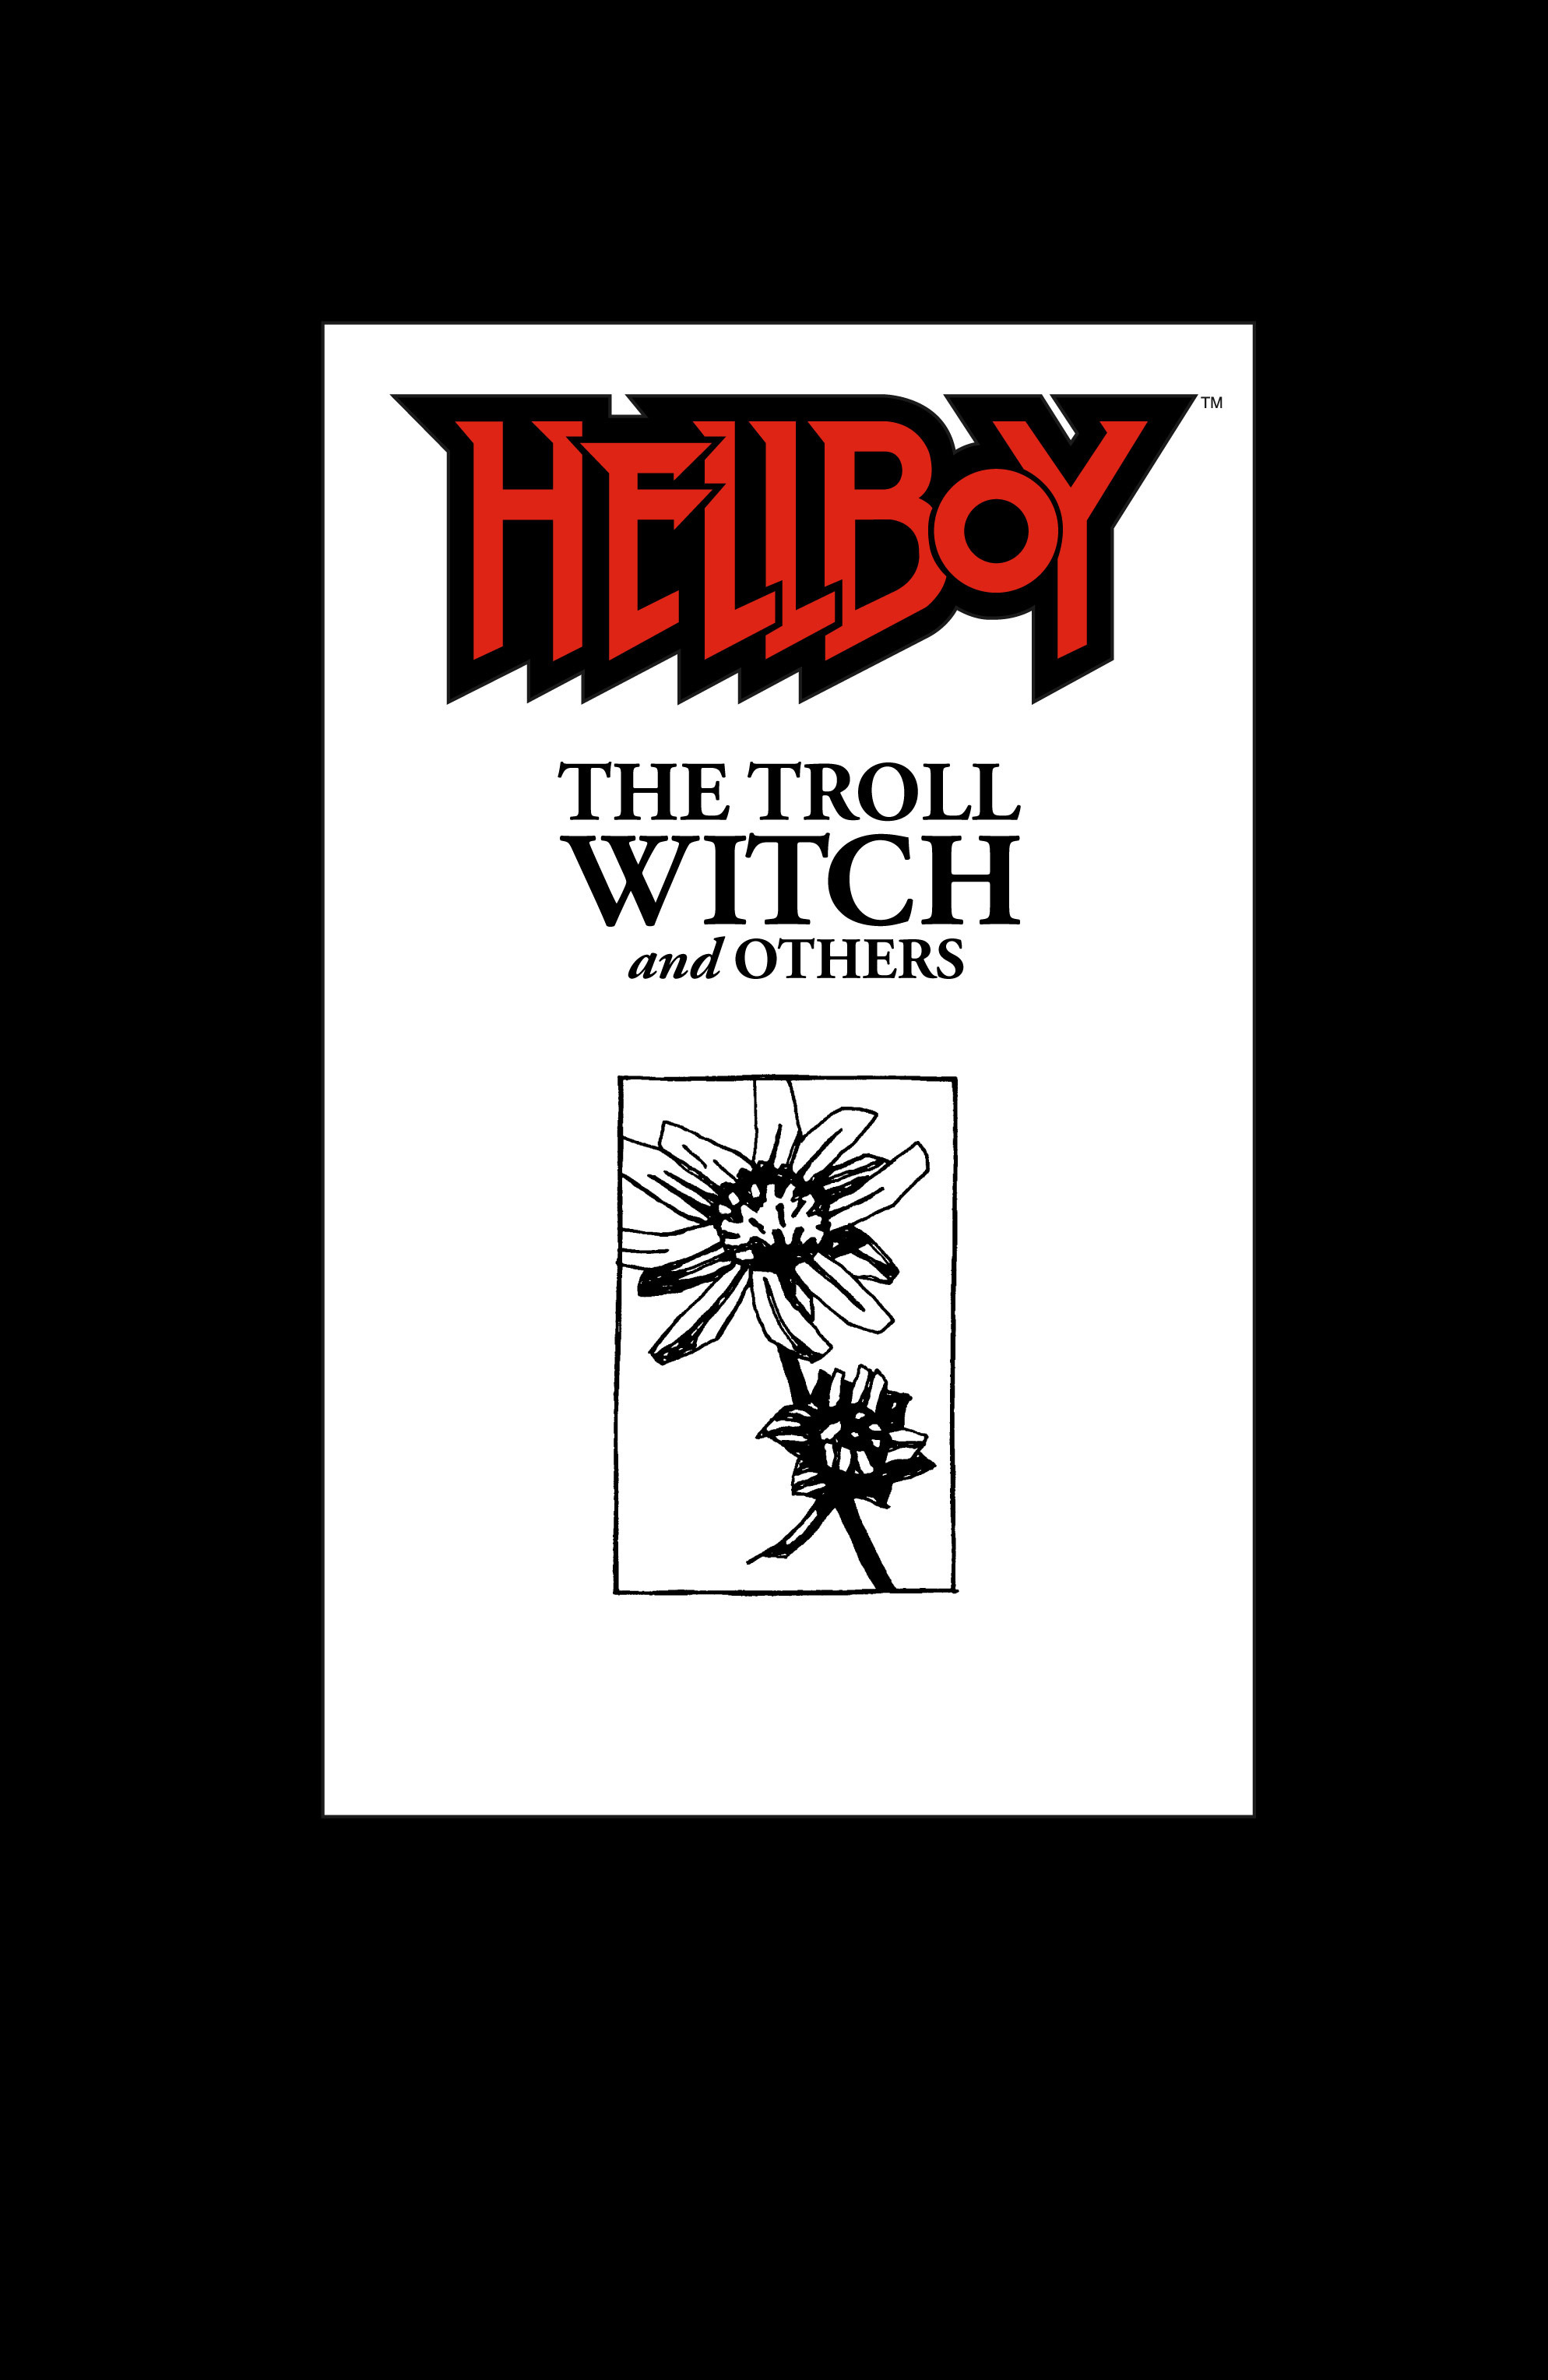 Read online Hellboy comic -  Issue #7 - 3